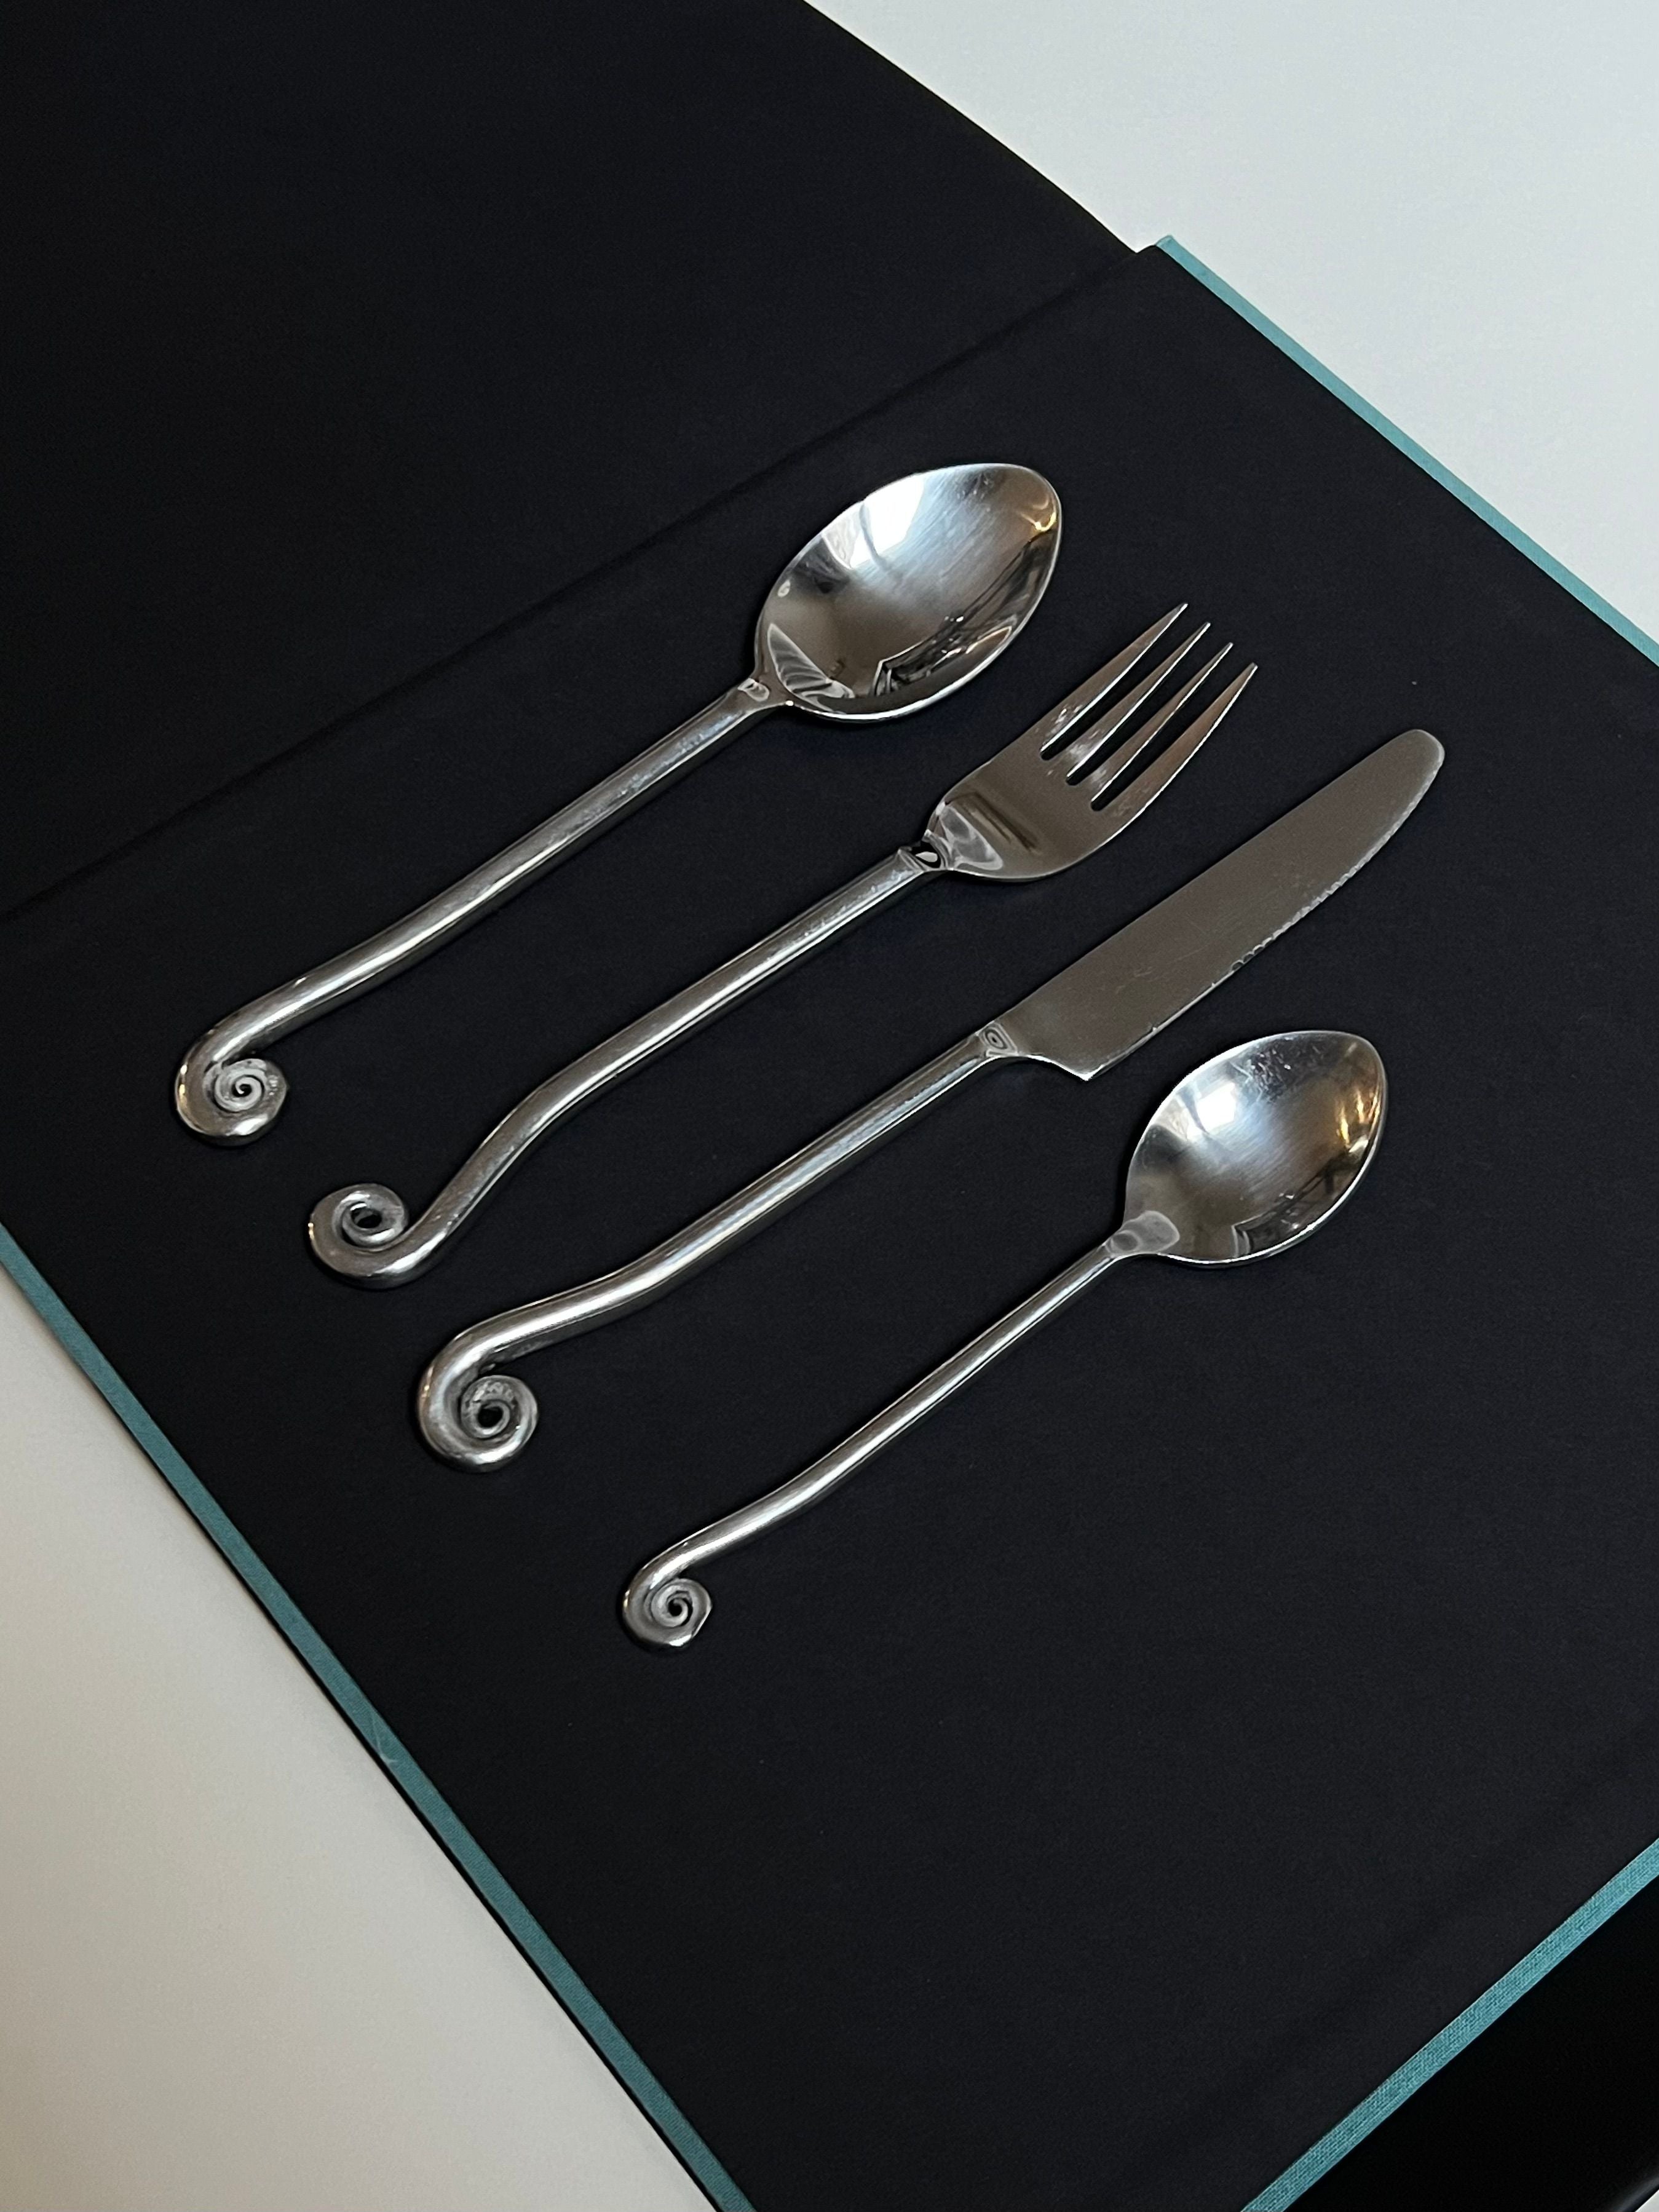 Elegant touch to a Manushi Vintage Swirl Cutlery set consisting of two spoons and a fork with intricate spiral handles, displayed on a dark blue book or box. A minimalist and sophisticated presentation.